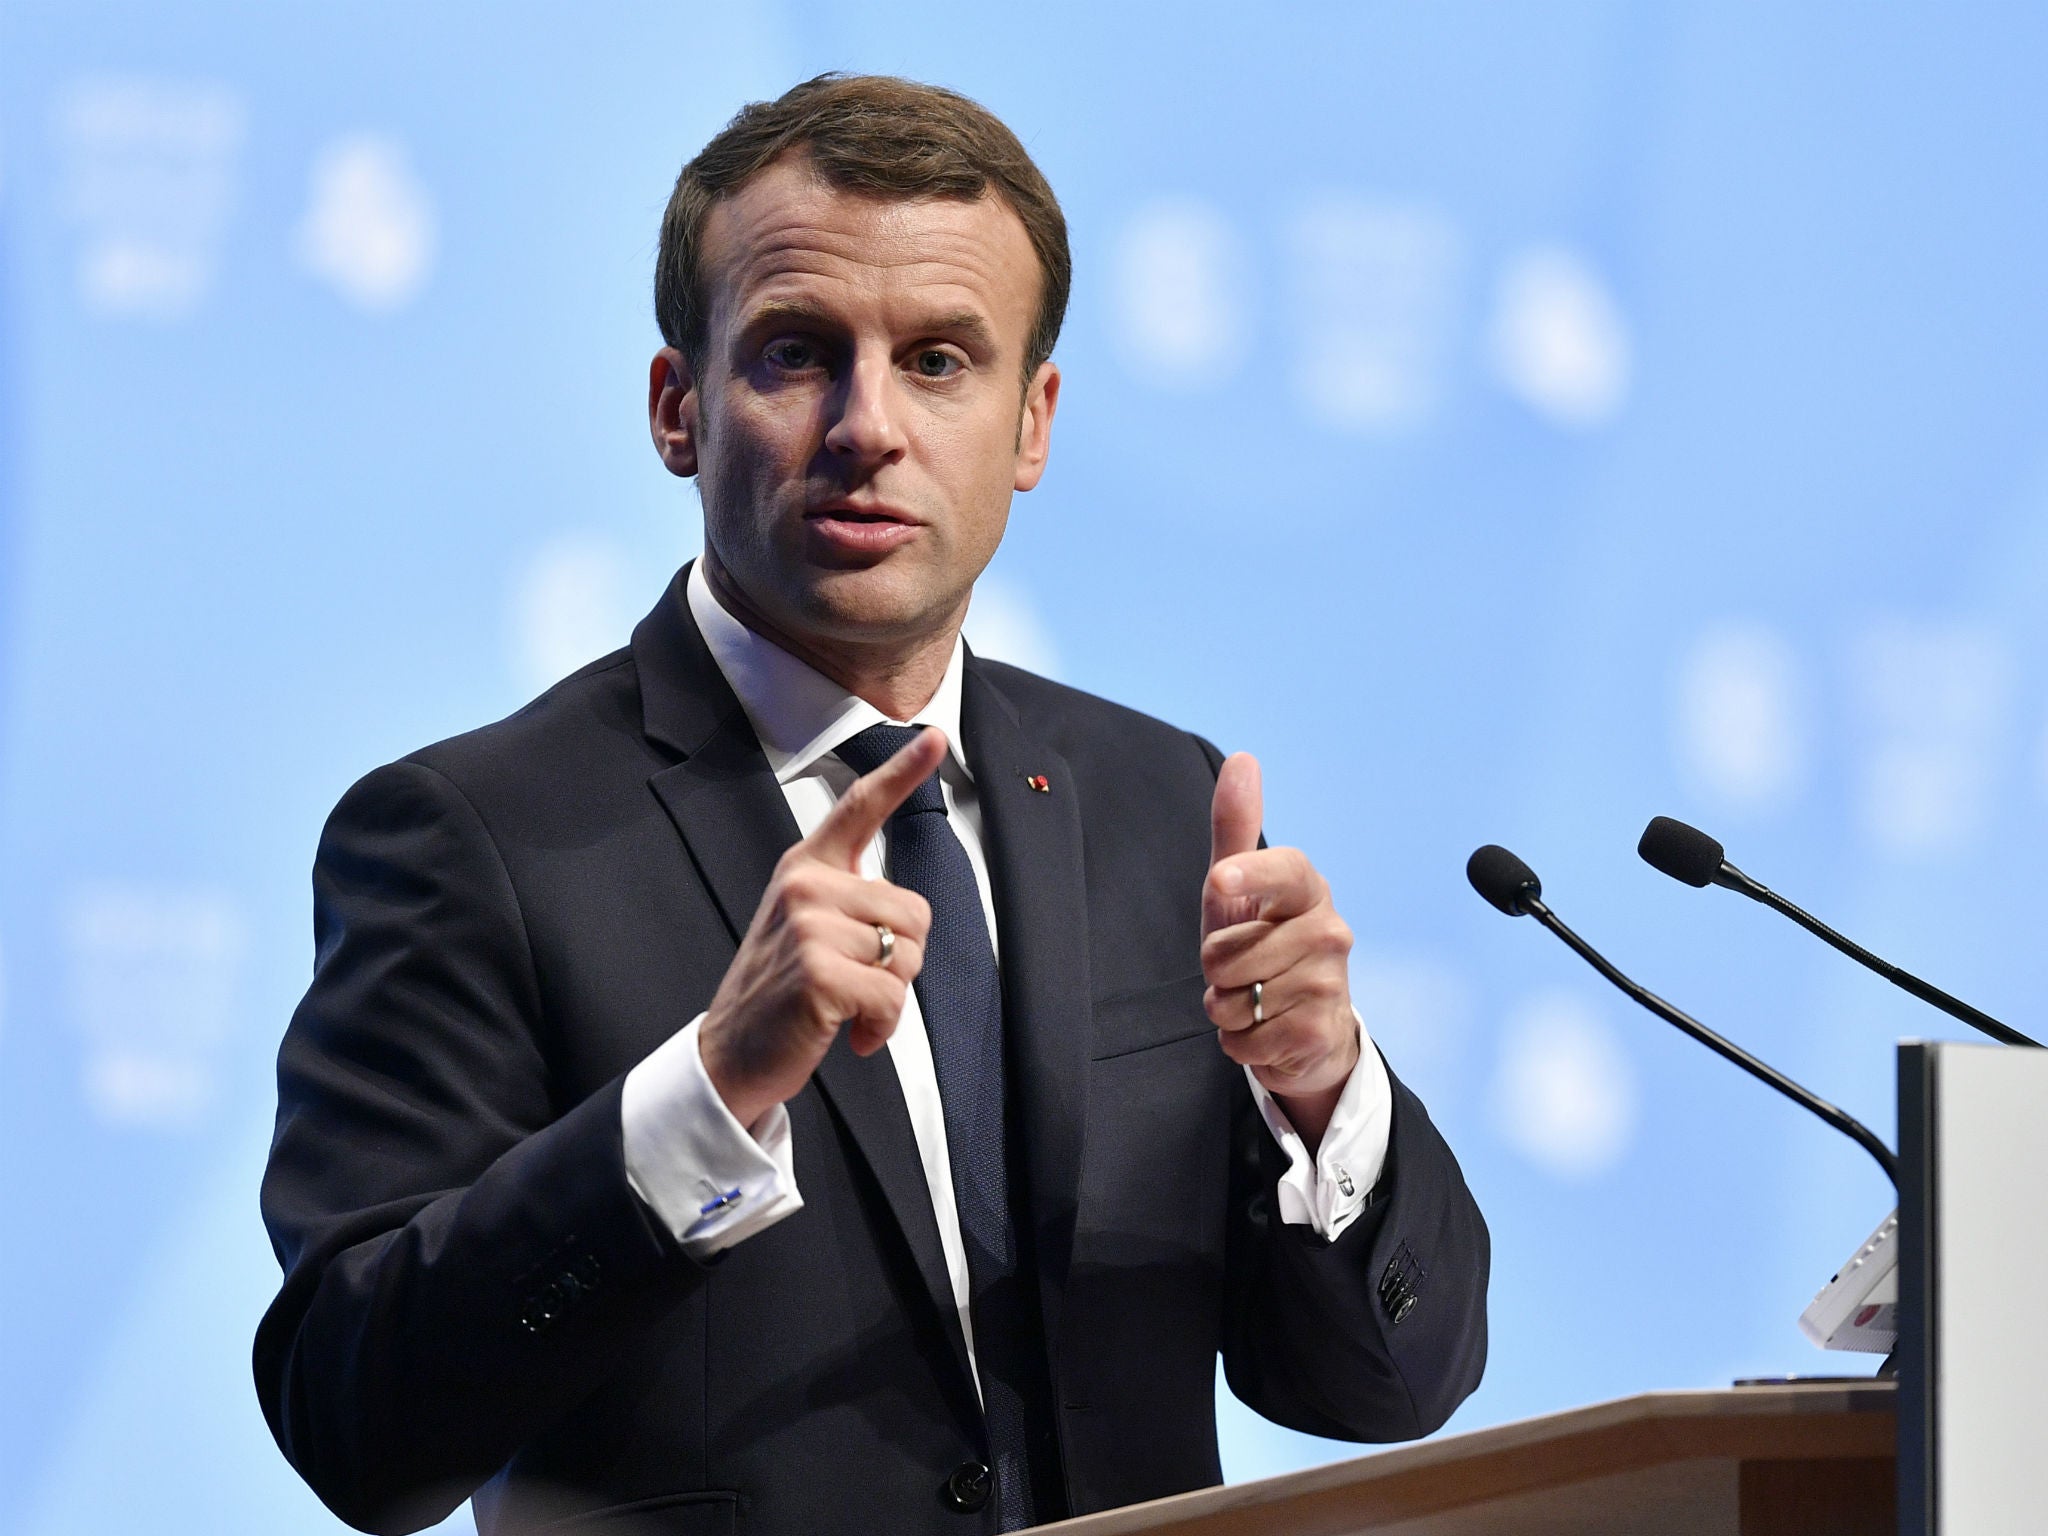 French President Emmanuel Macron delivers a speech during the 23rd Conference of the Parties (COP) climate talks in Bonn, Germany